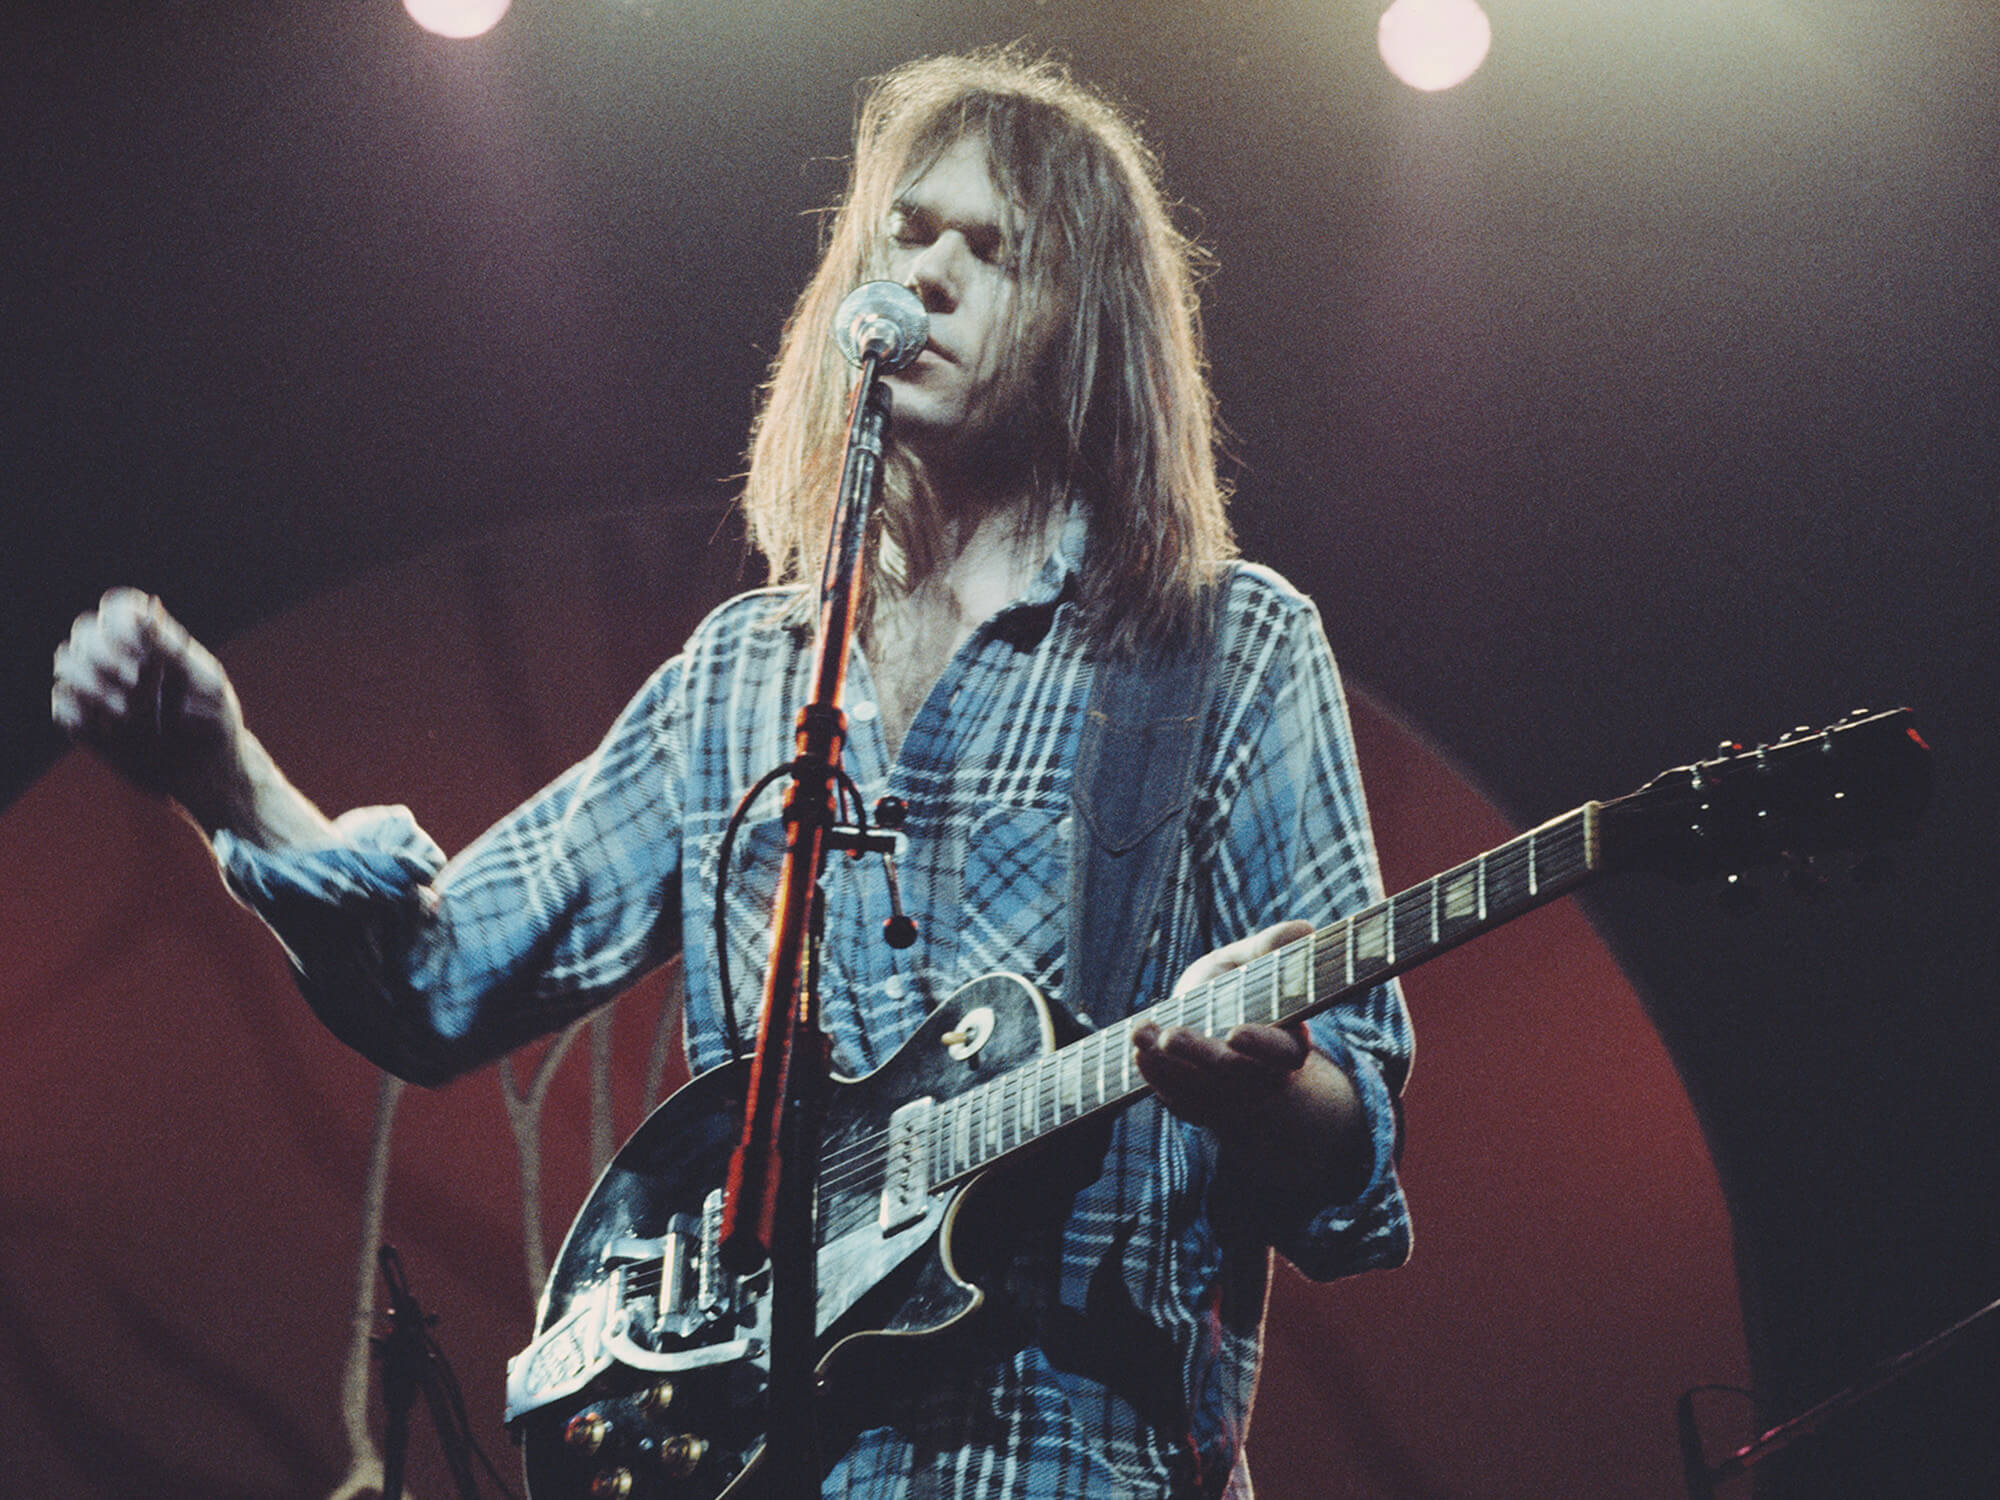 Neil Young performing in London in 1976, photo by Michael Putland/Getty Images